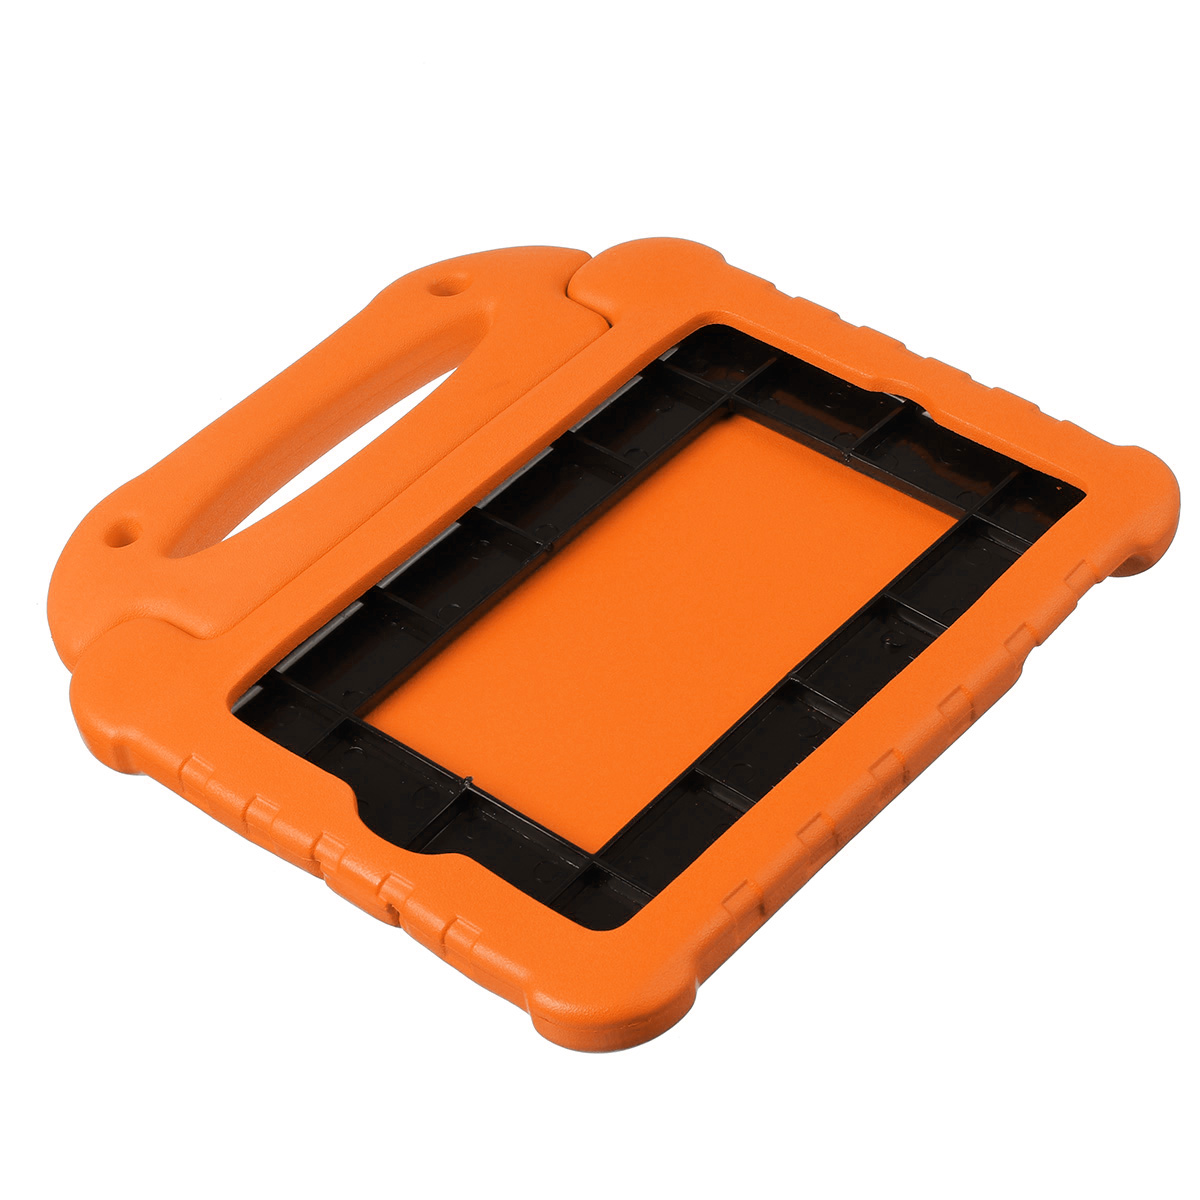 Portable-Kids-Friendly-Safe-EVA-with-Handle-Bracket-Stand-Tablet-Shockproof-Protective-Case-for-iPad-1777875-3